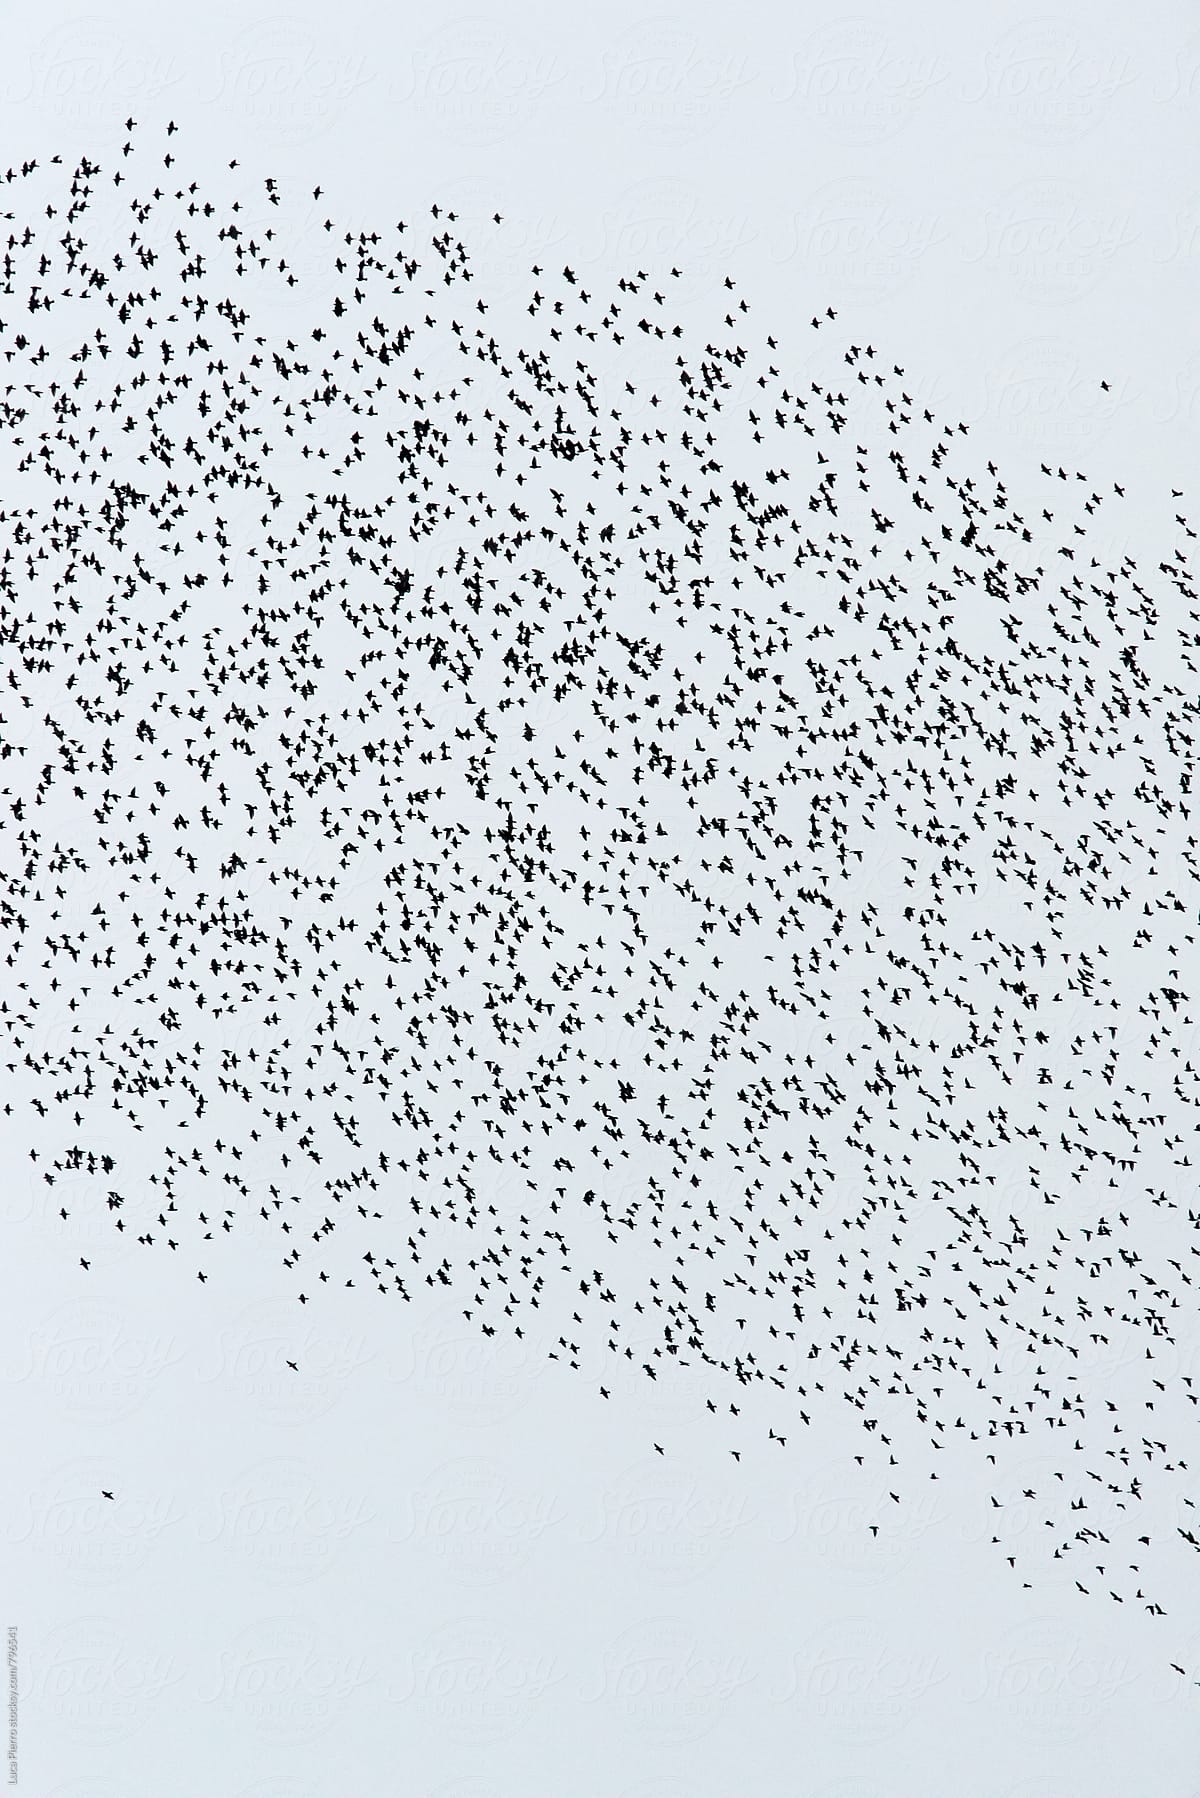 Flock of birds forming patterns  in the sky